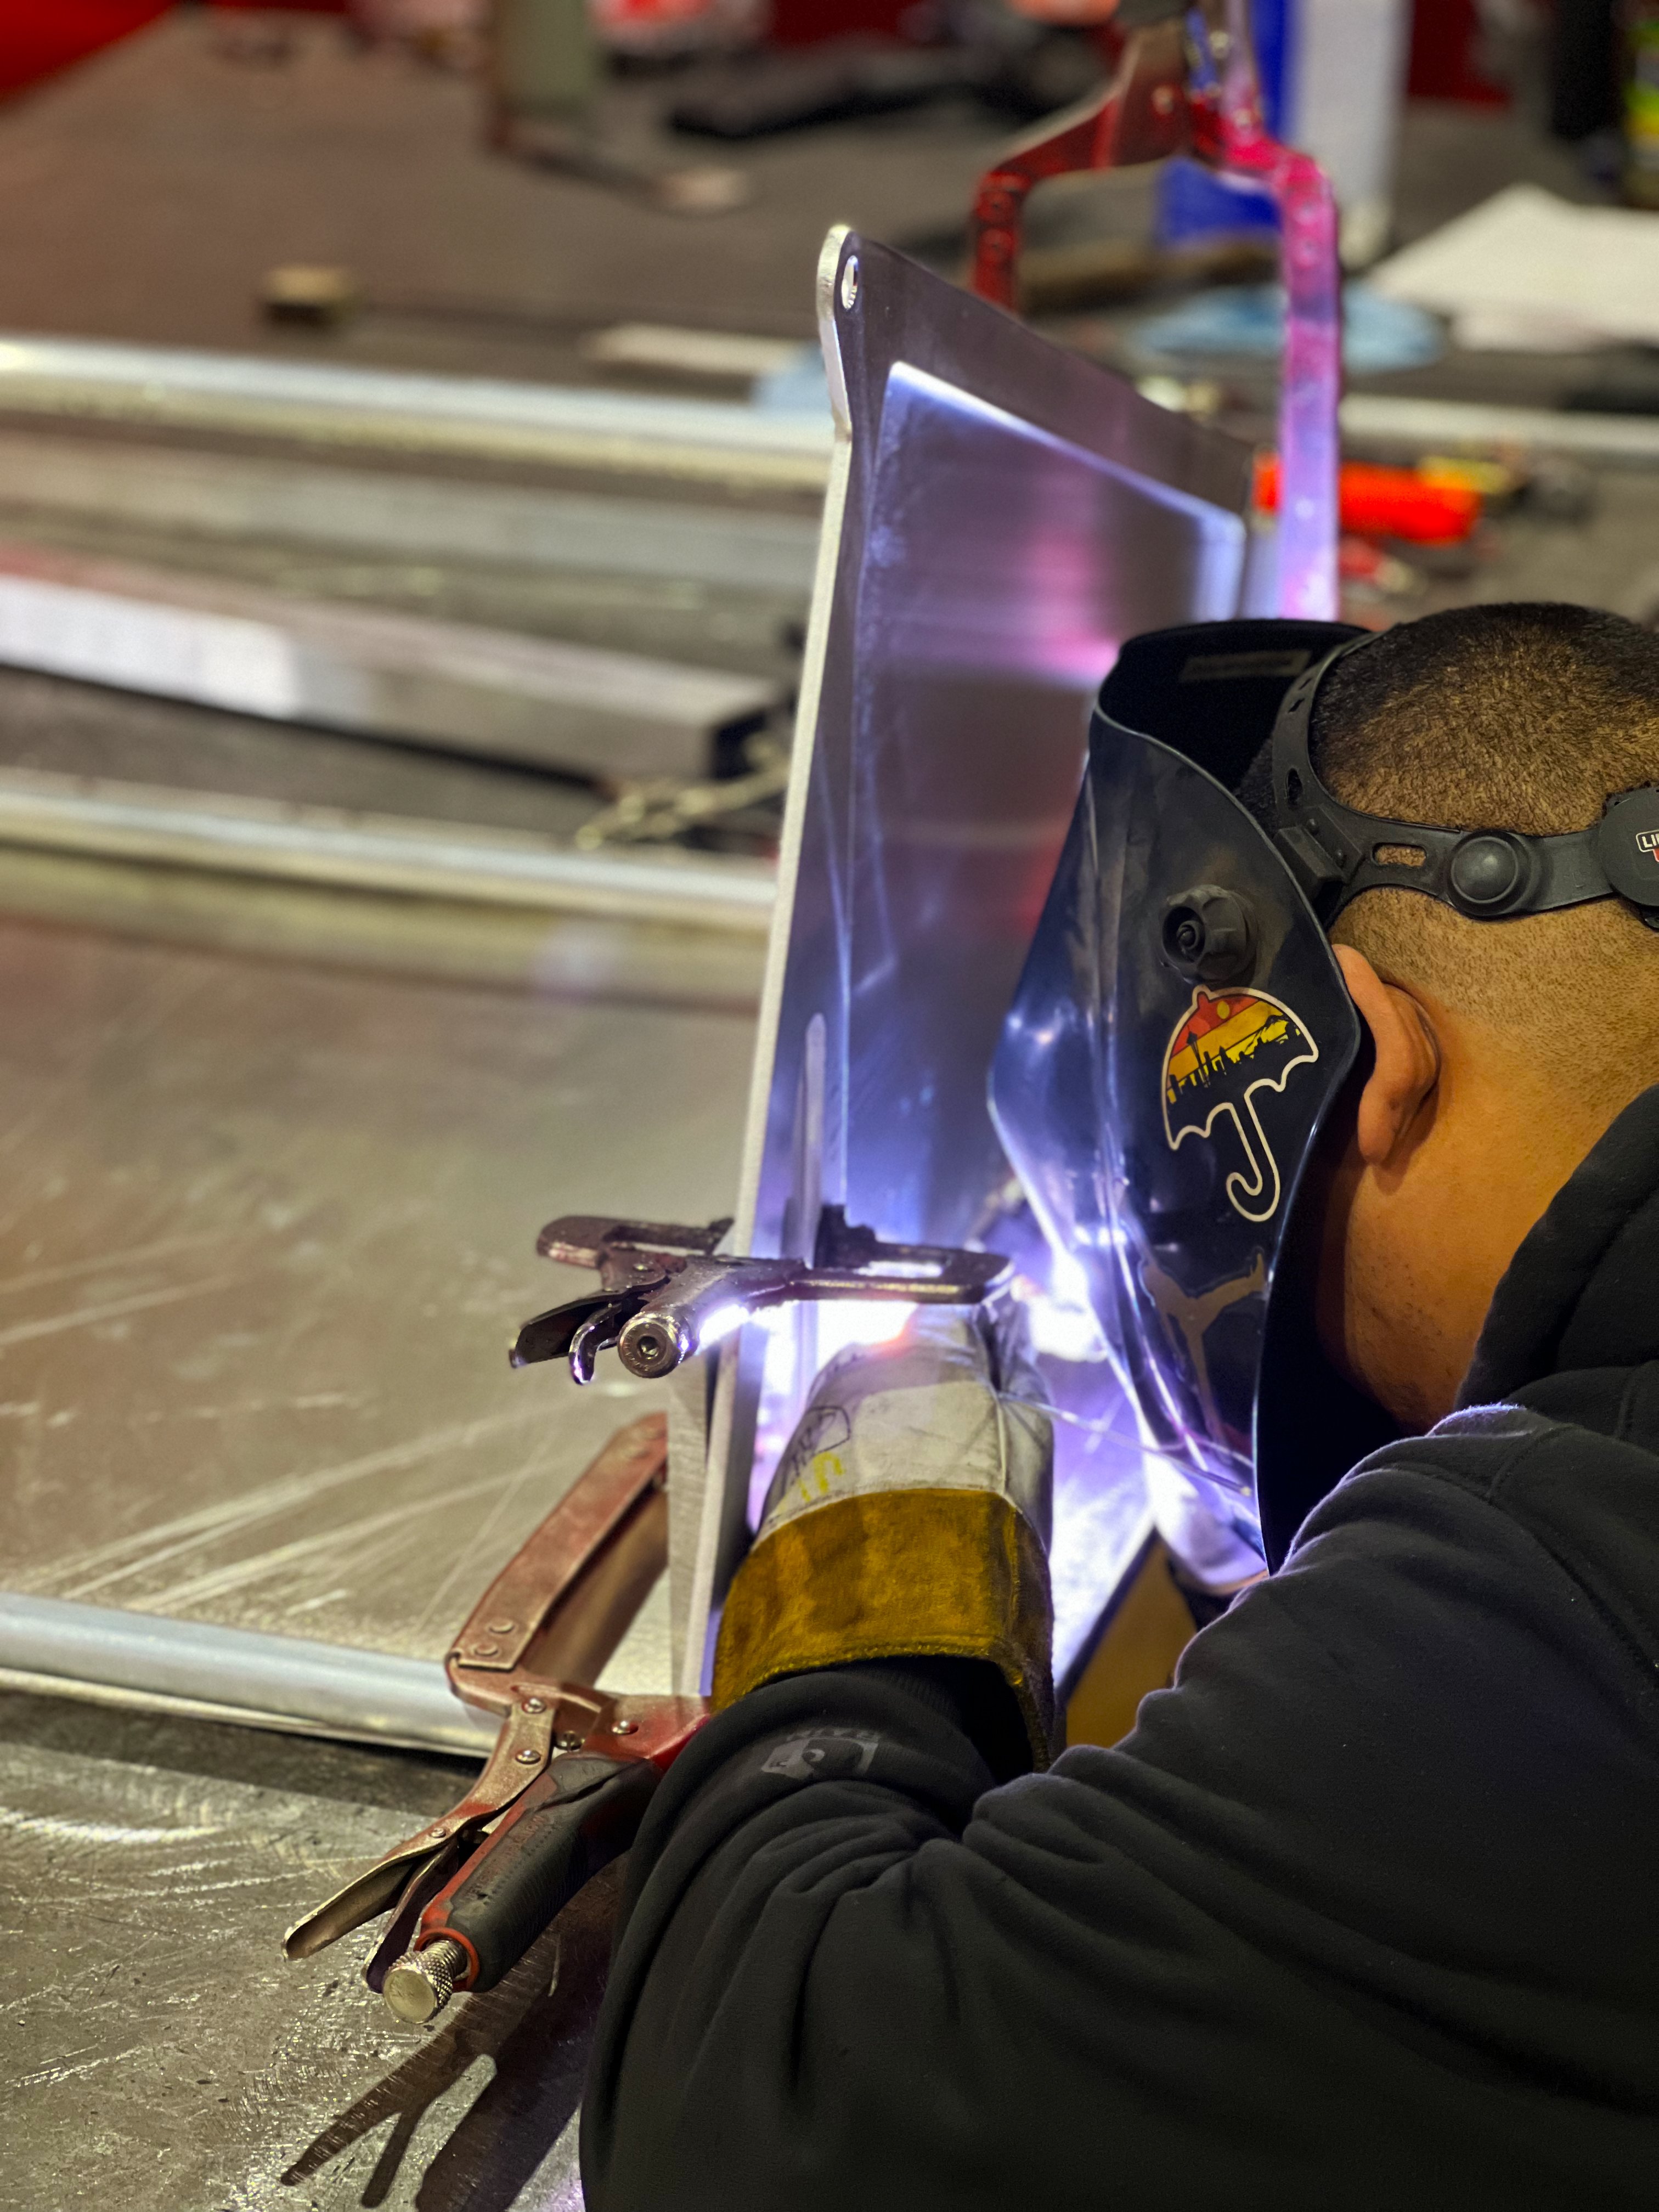 A space panel being welded